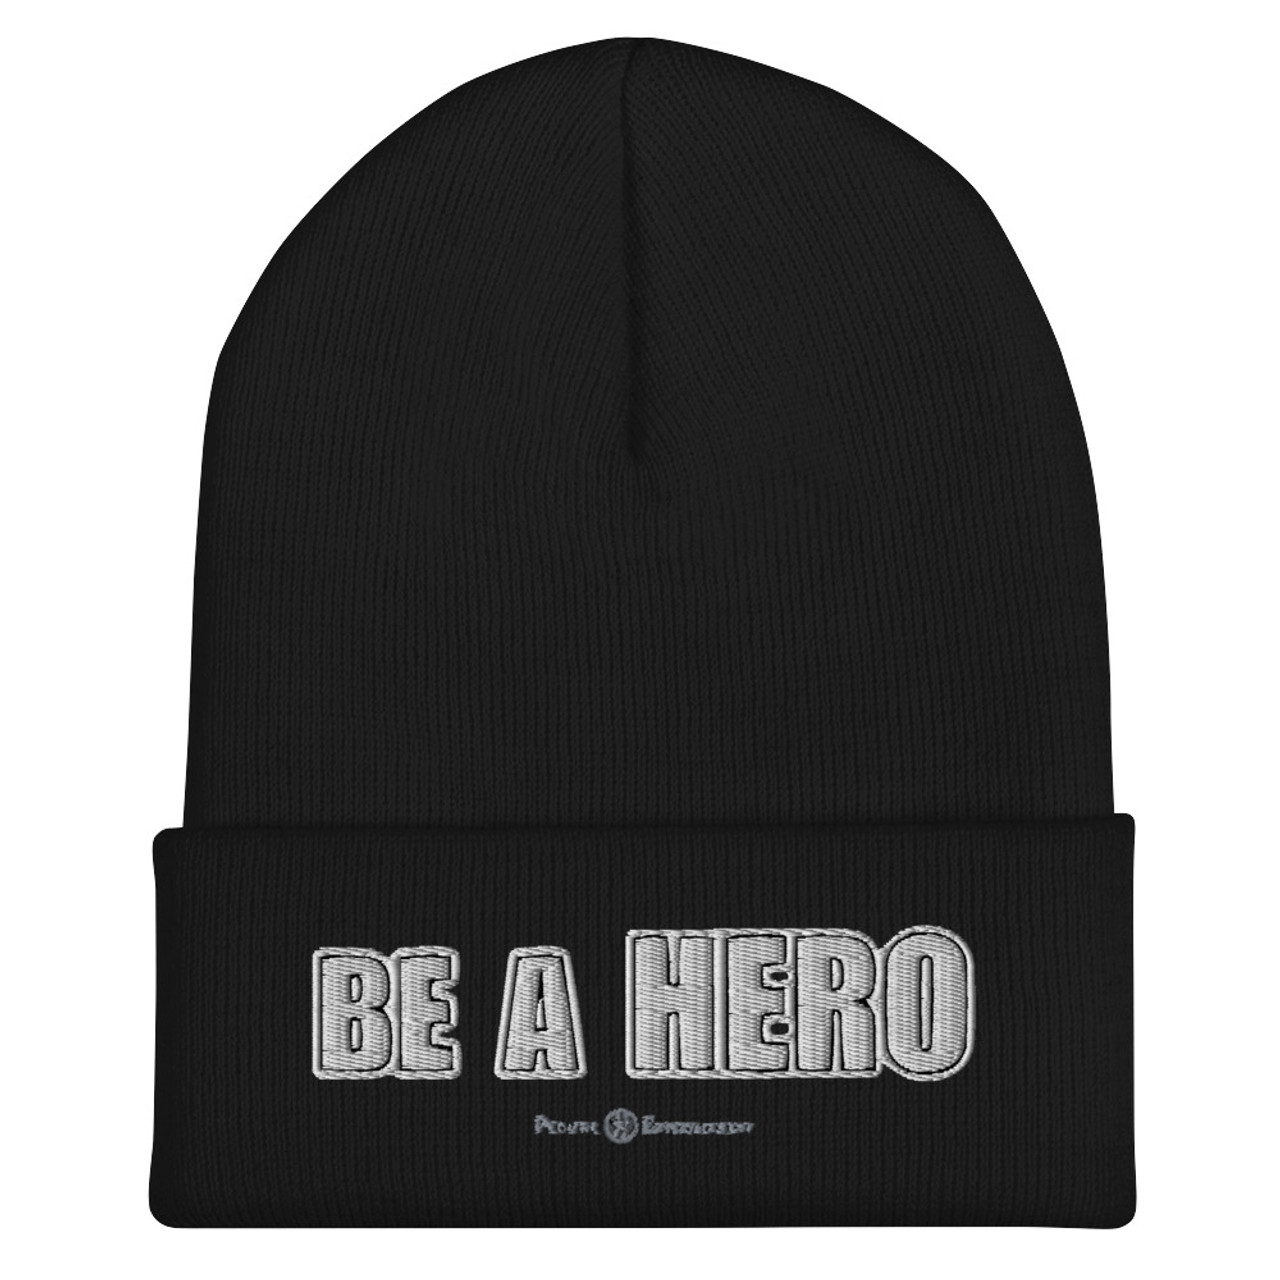 BE A HERO - Silver Letters - Cuffed Beanie